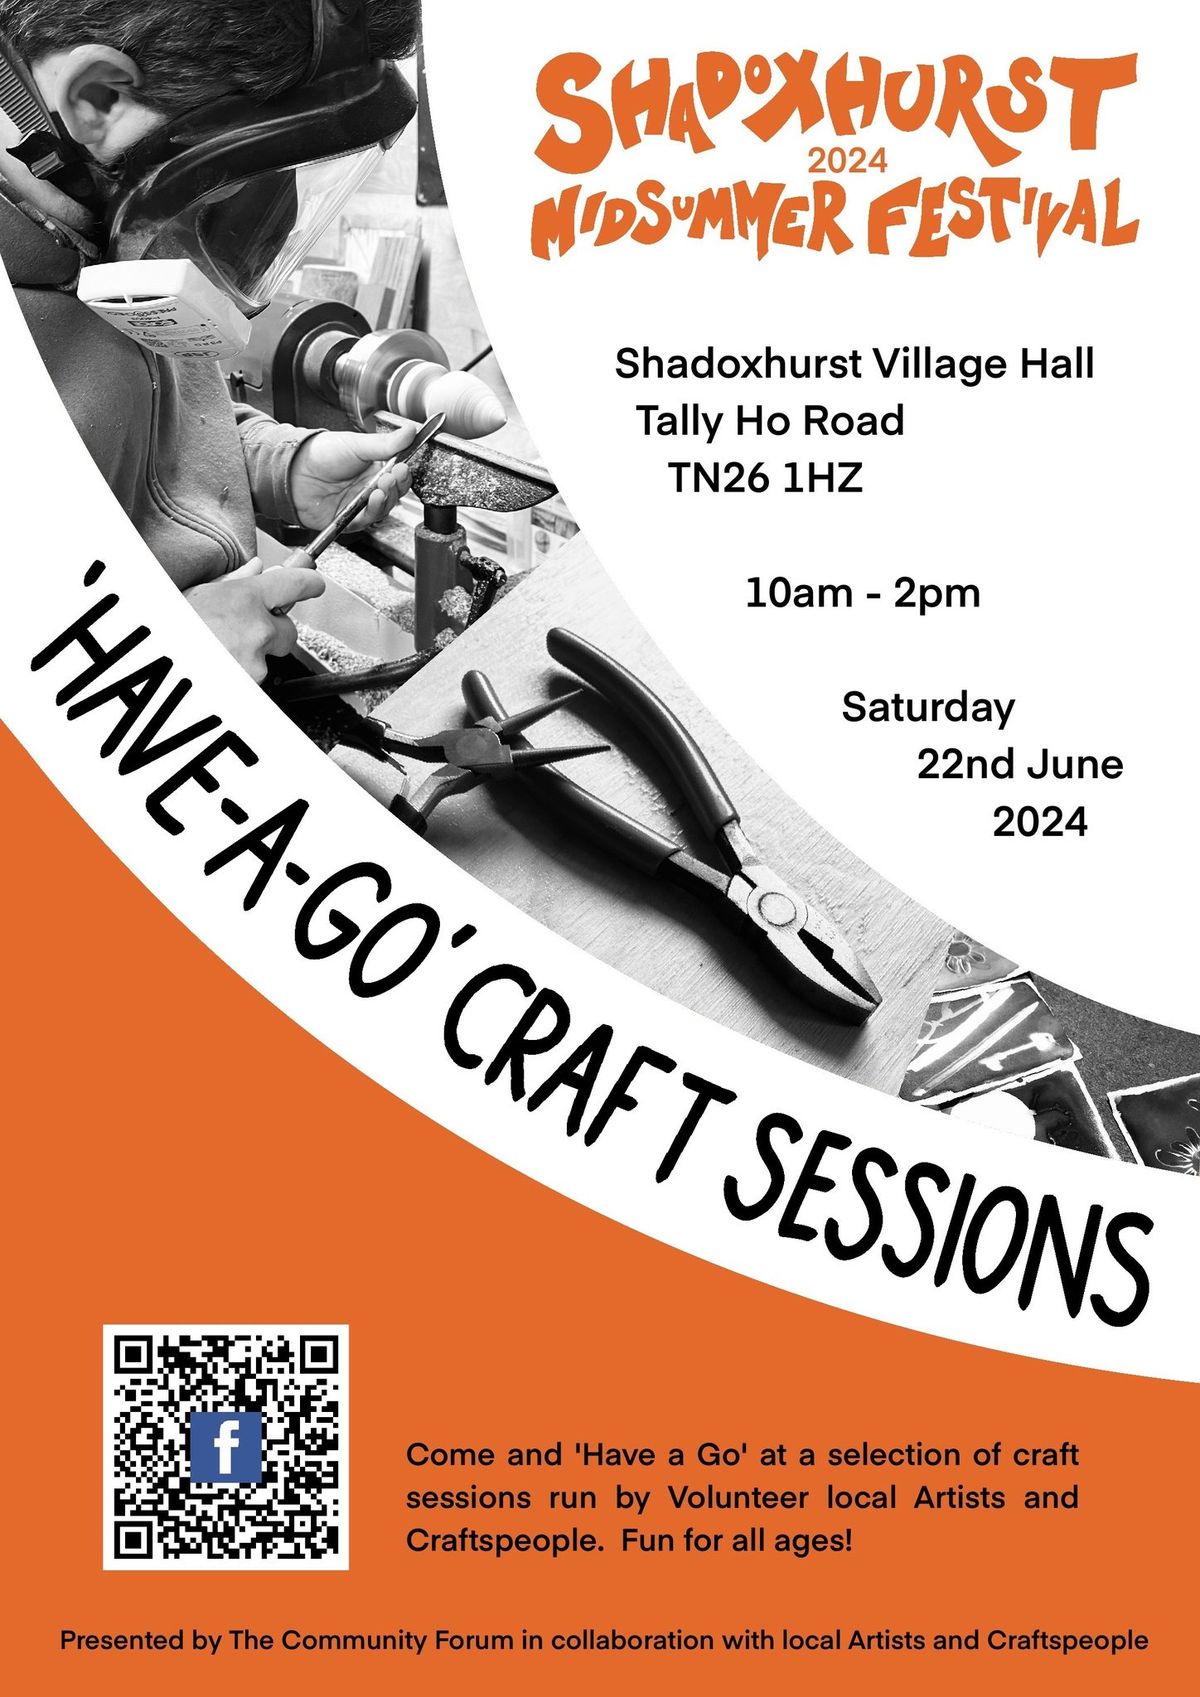 'Have A Go' Crafting Activities & Demonstrations